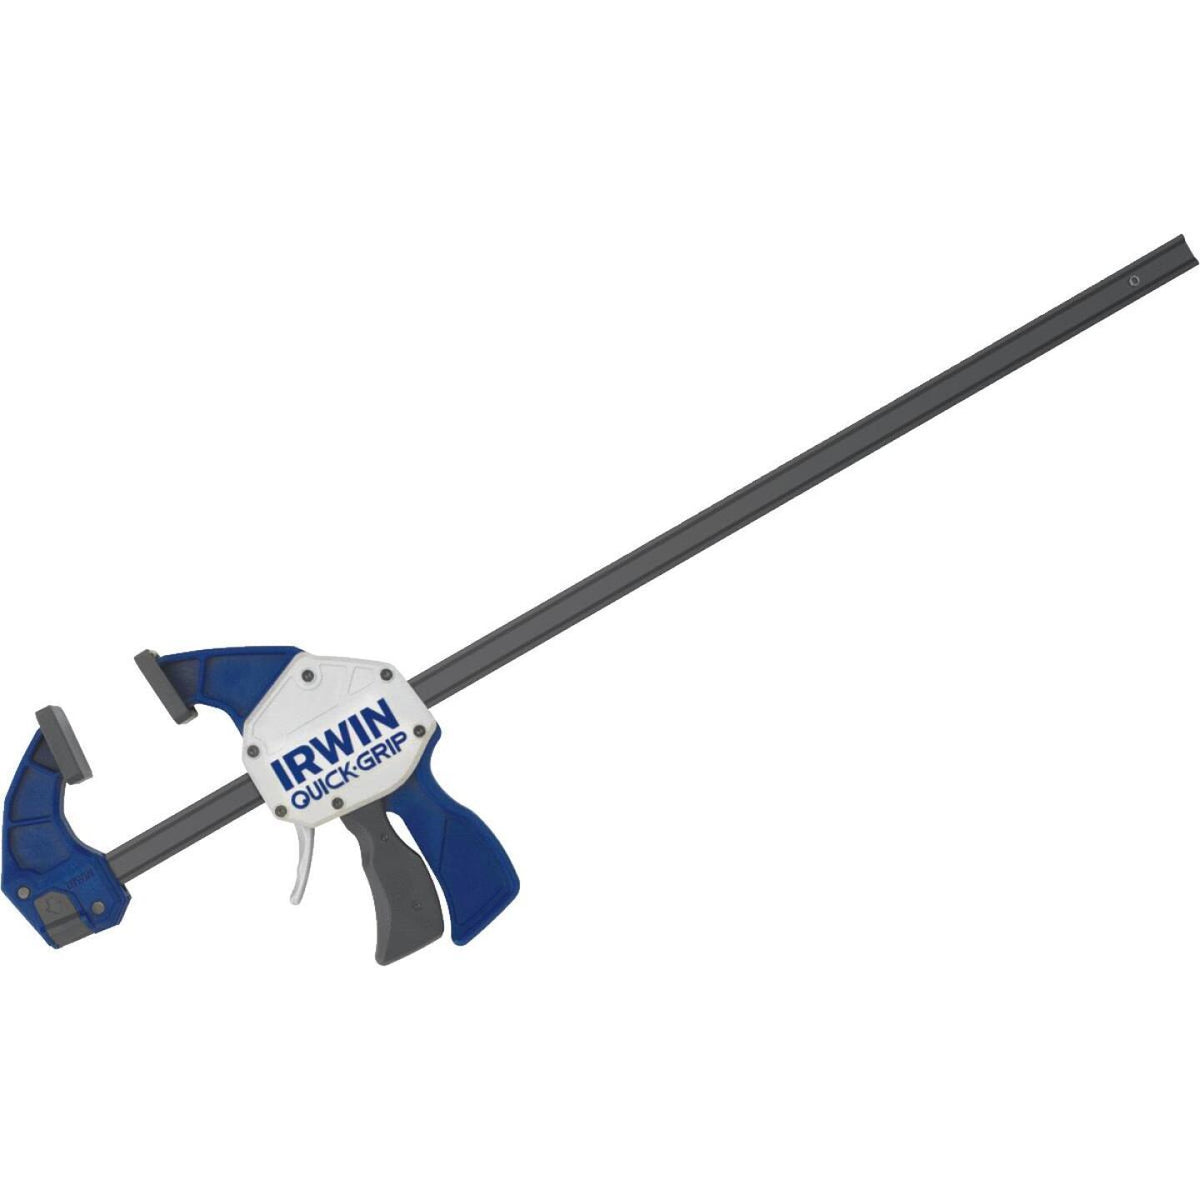 Irwin Quick-Grip XP 24 In. x 3-1/4 In. One-Hand Bar Clamp and